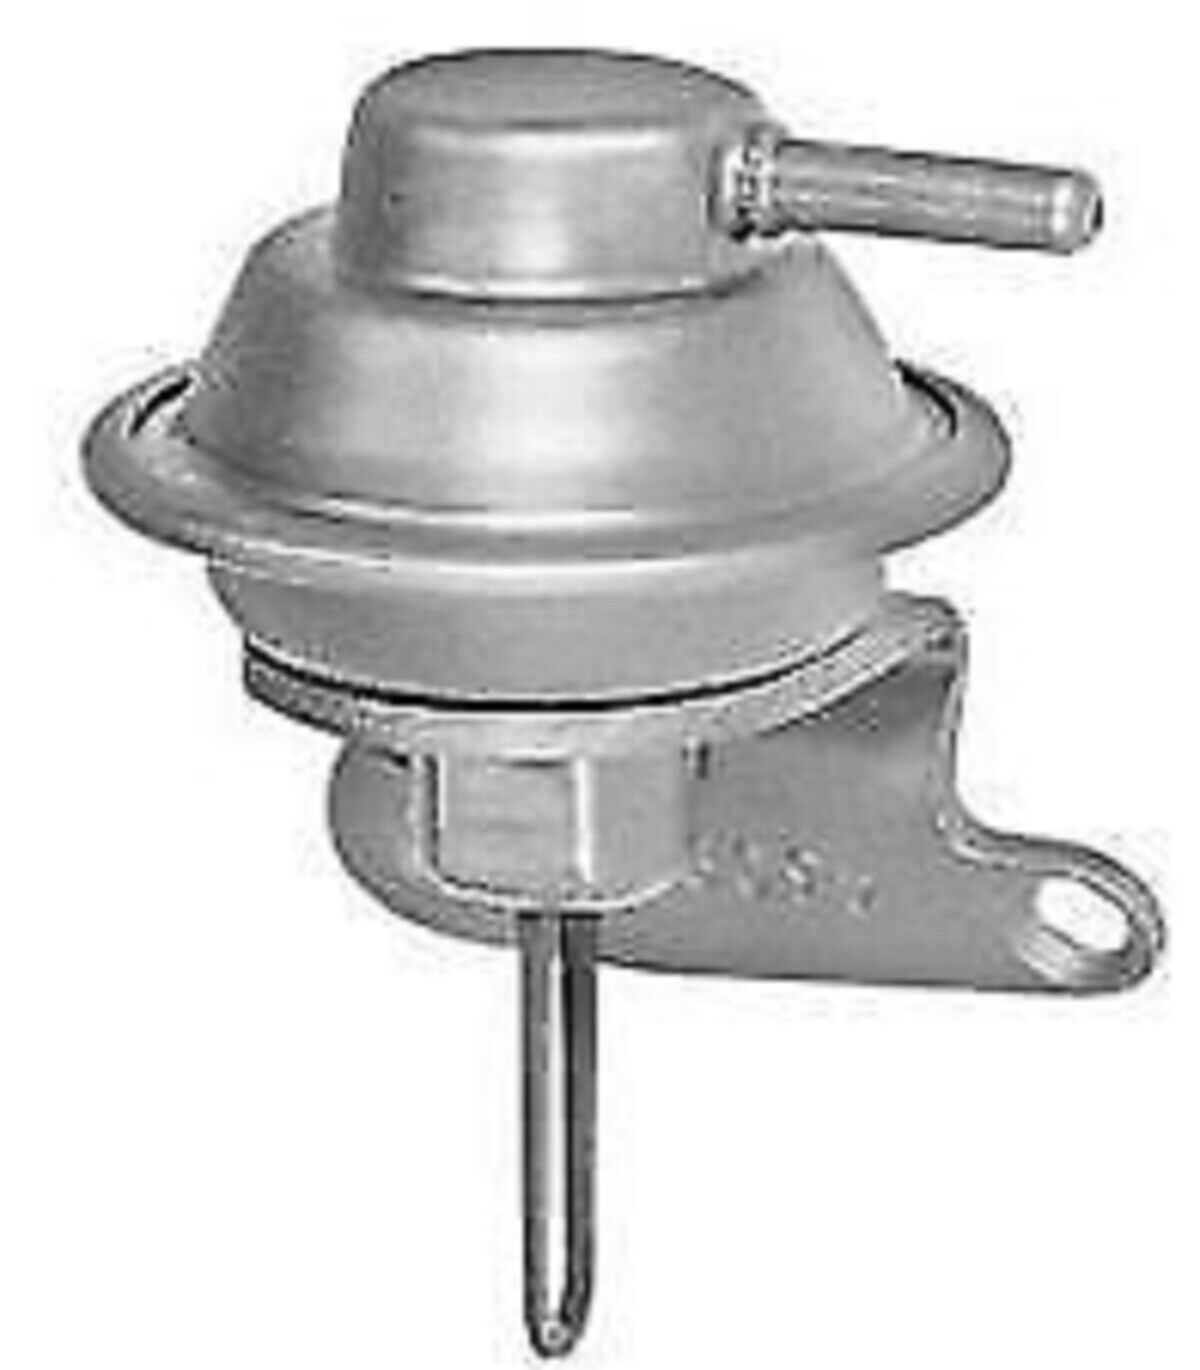 Standard CPA116 CPA 116 Choke Pull Off Assembly Fits 1974 Chevrolet Vega New! - $17.35